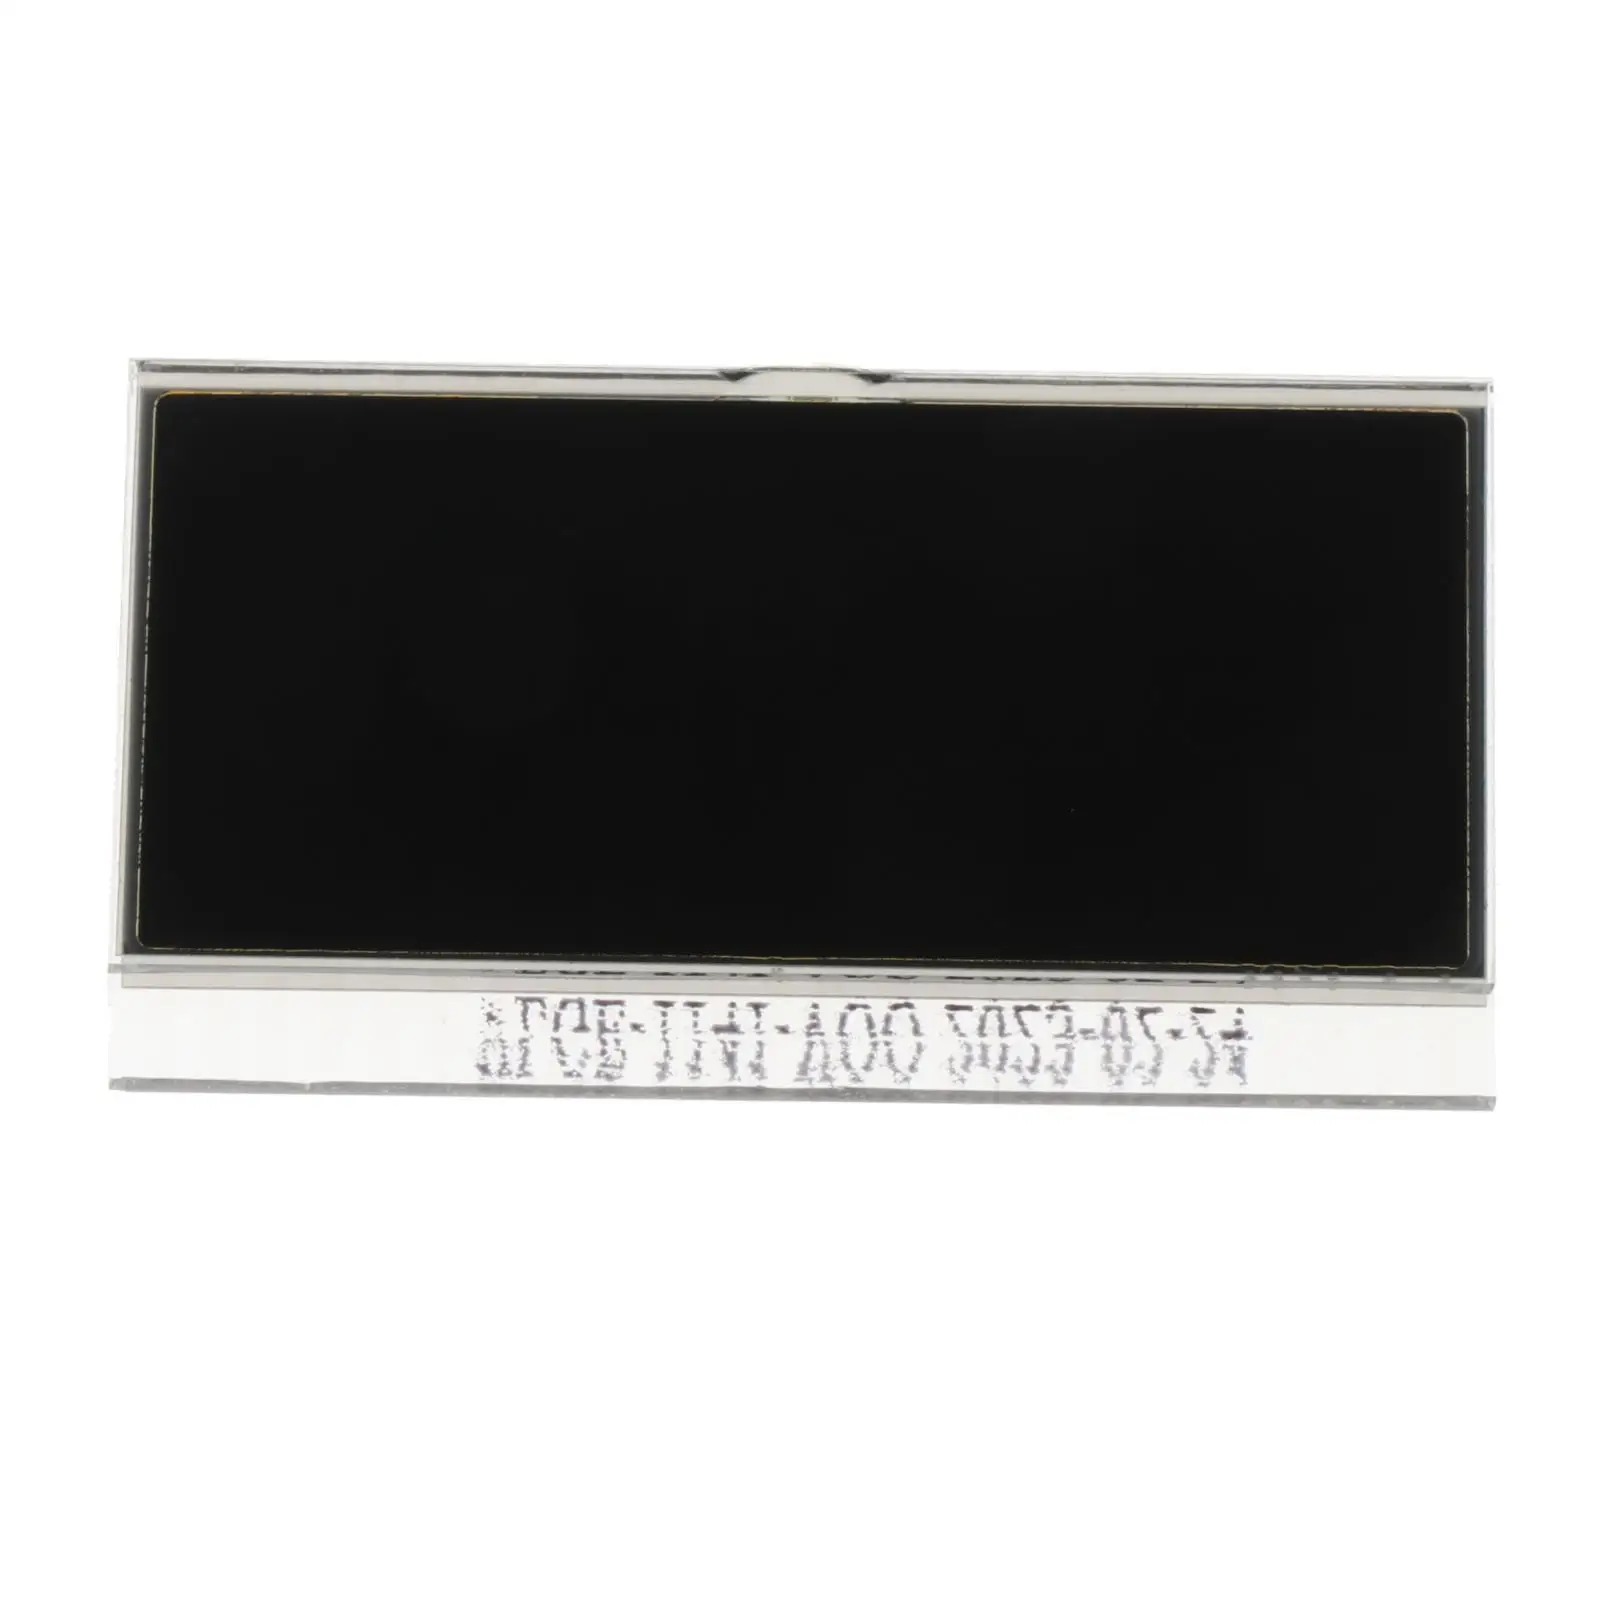 LCD Screen Air Conditioning Pixel Repair Replacement Parts High Performance for Audi A6 4F Q7 4L 2005-2012 Accessory